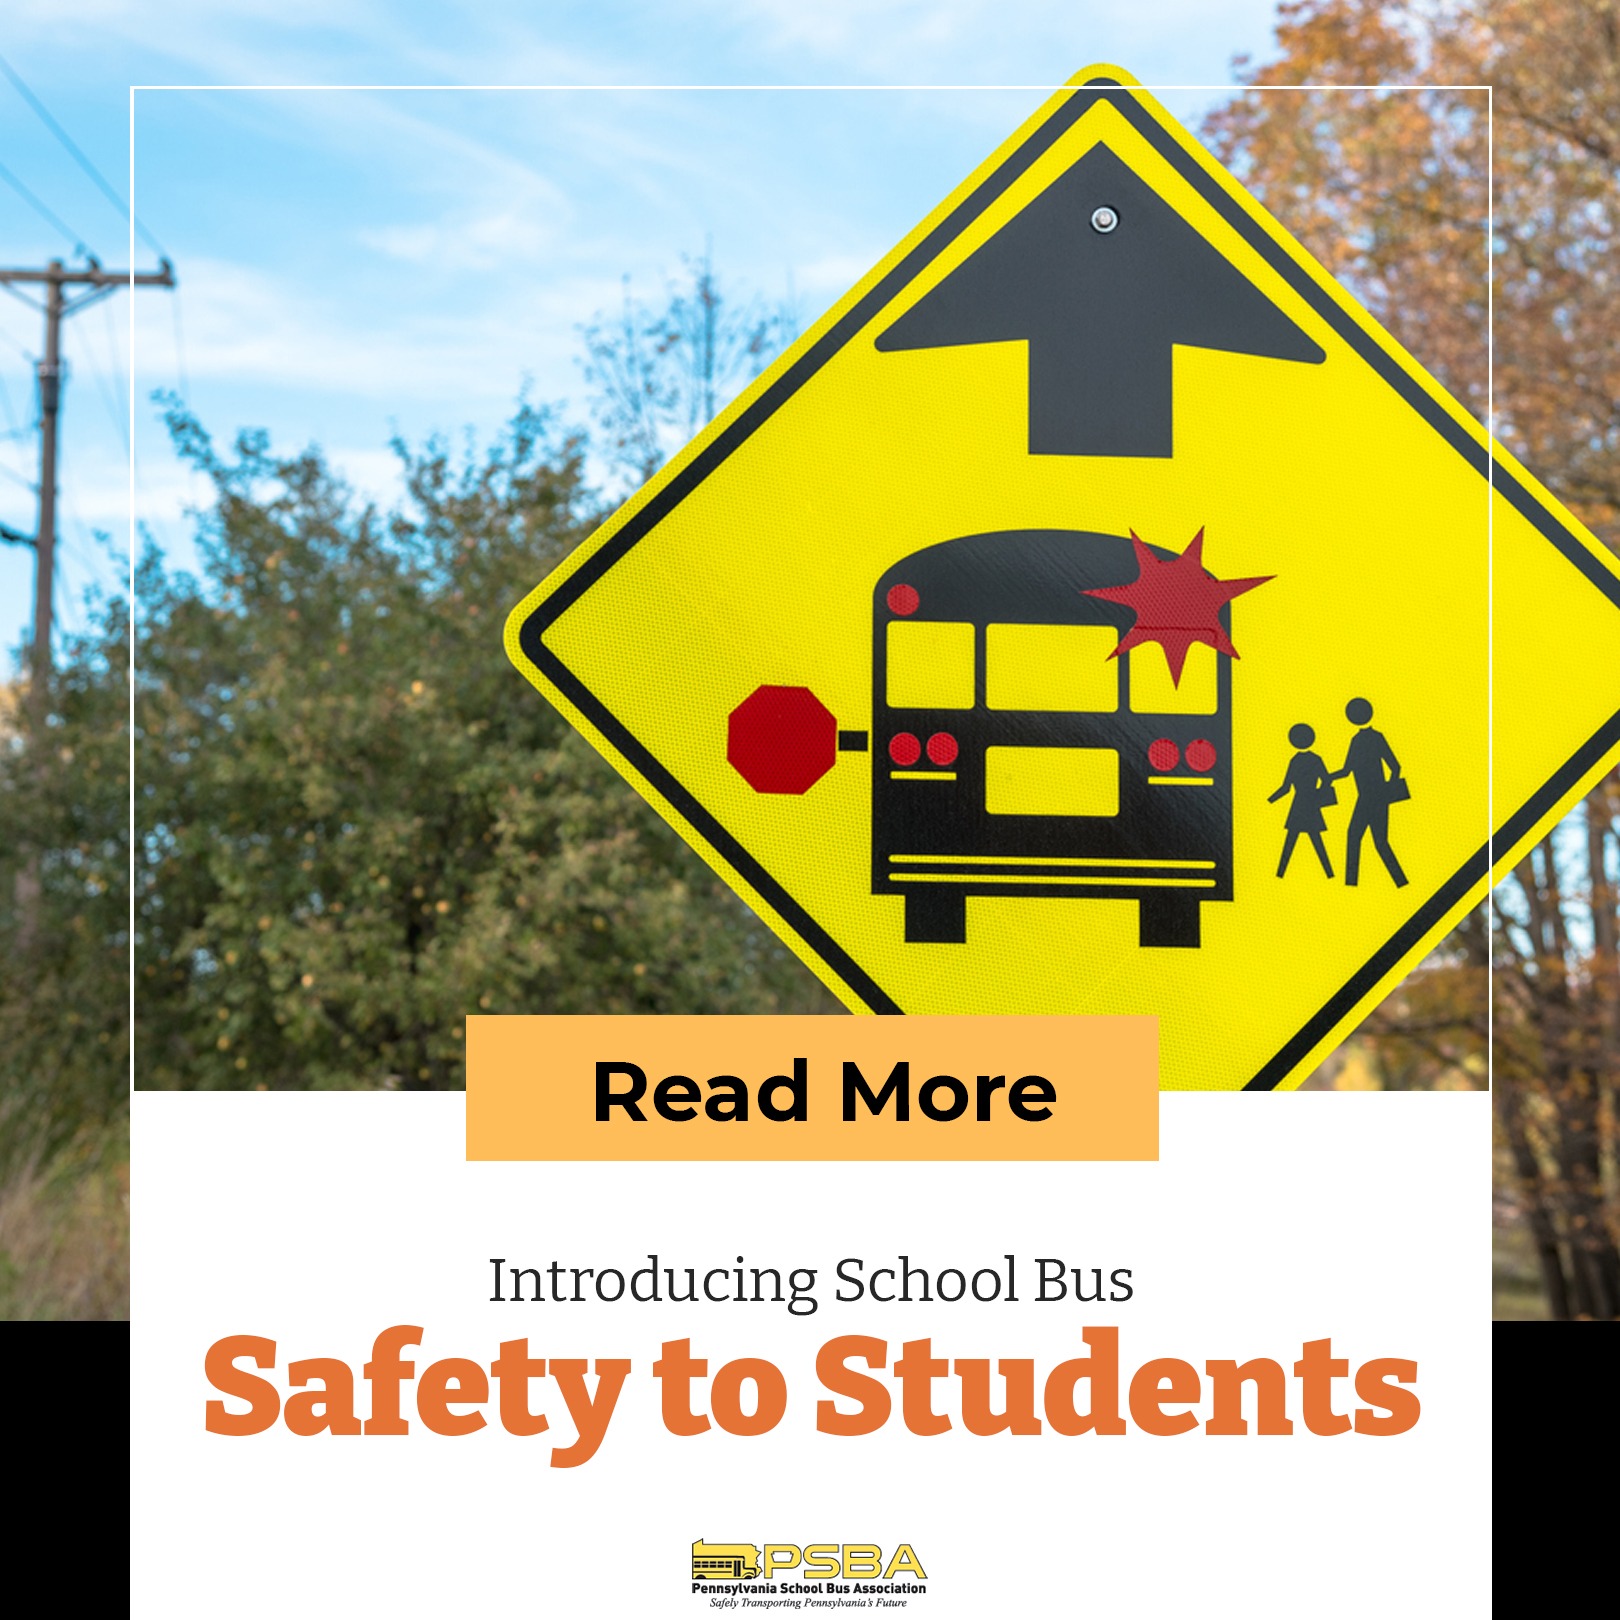 Introducing School Bus Safety to Students